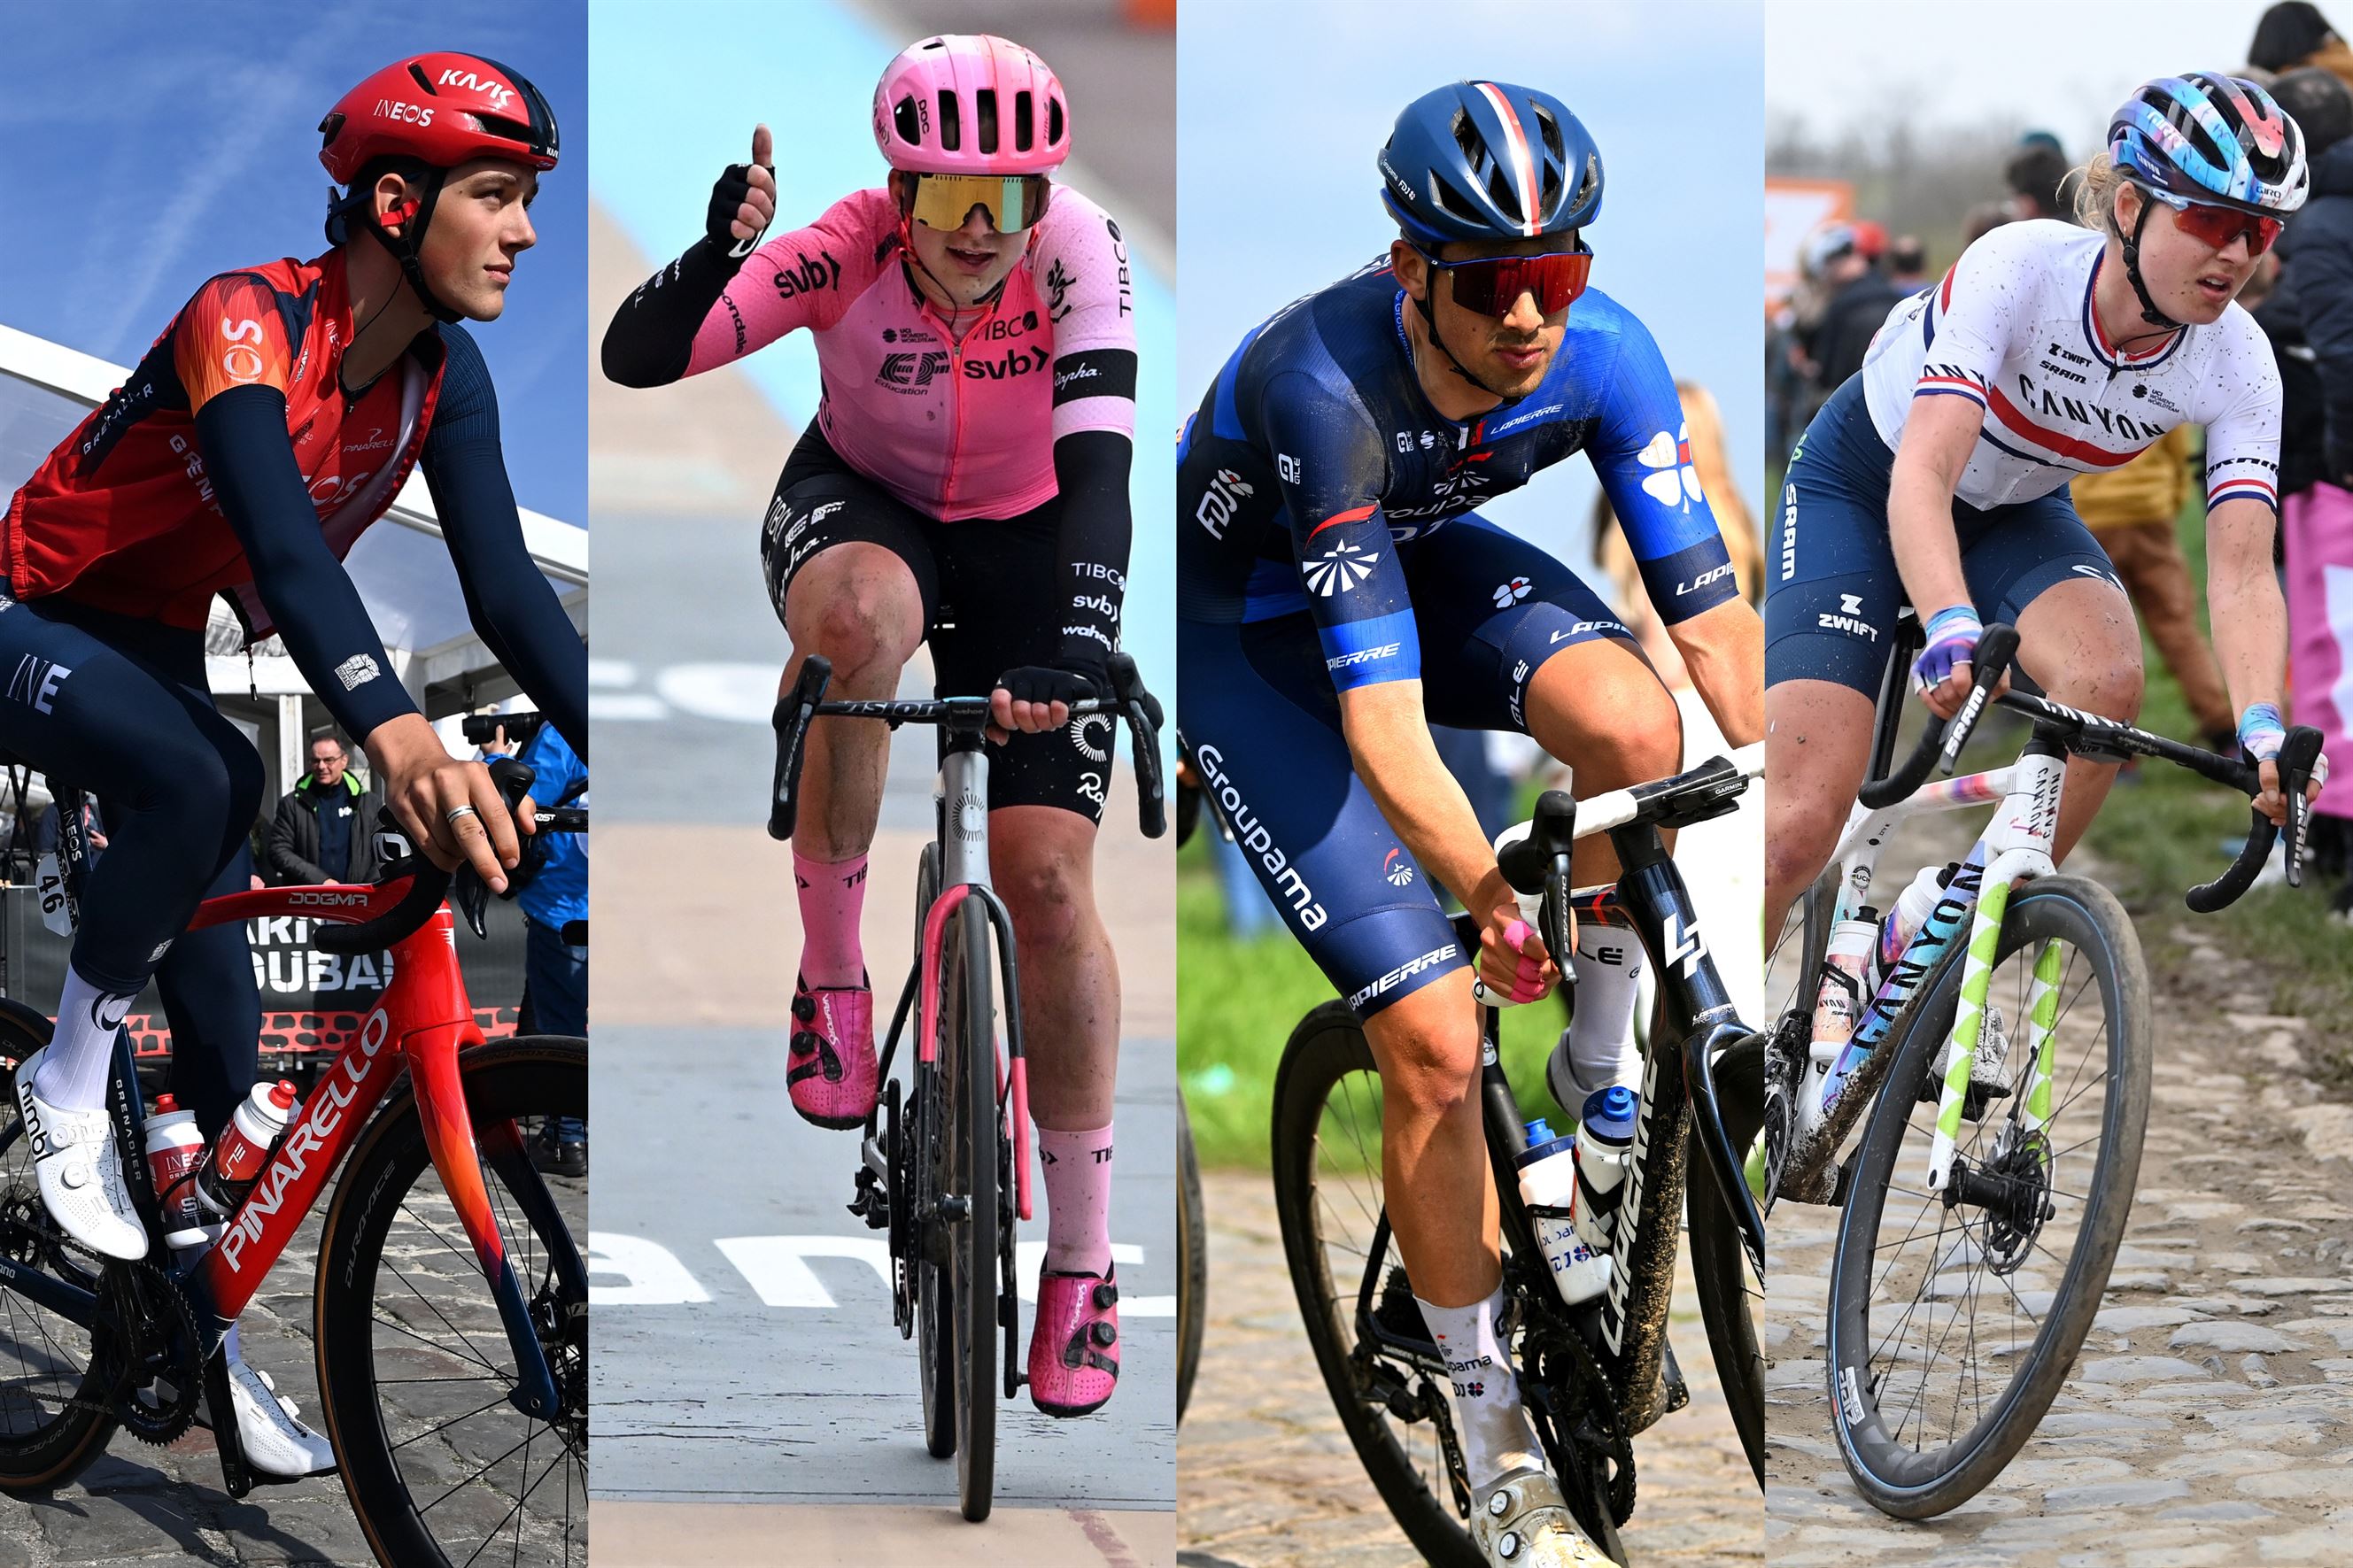 &lsquo;It was just agony&rsquo;: Inside the Paris-Roubaix debuts of four young Brits